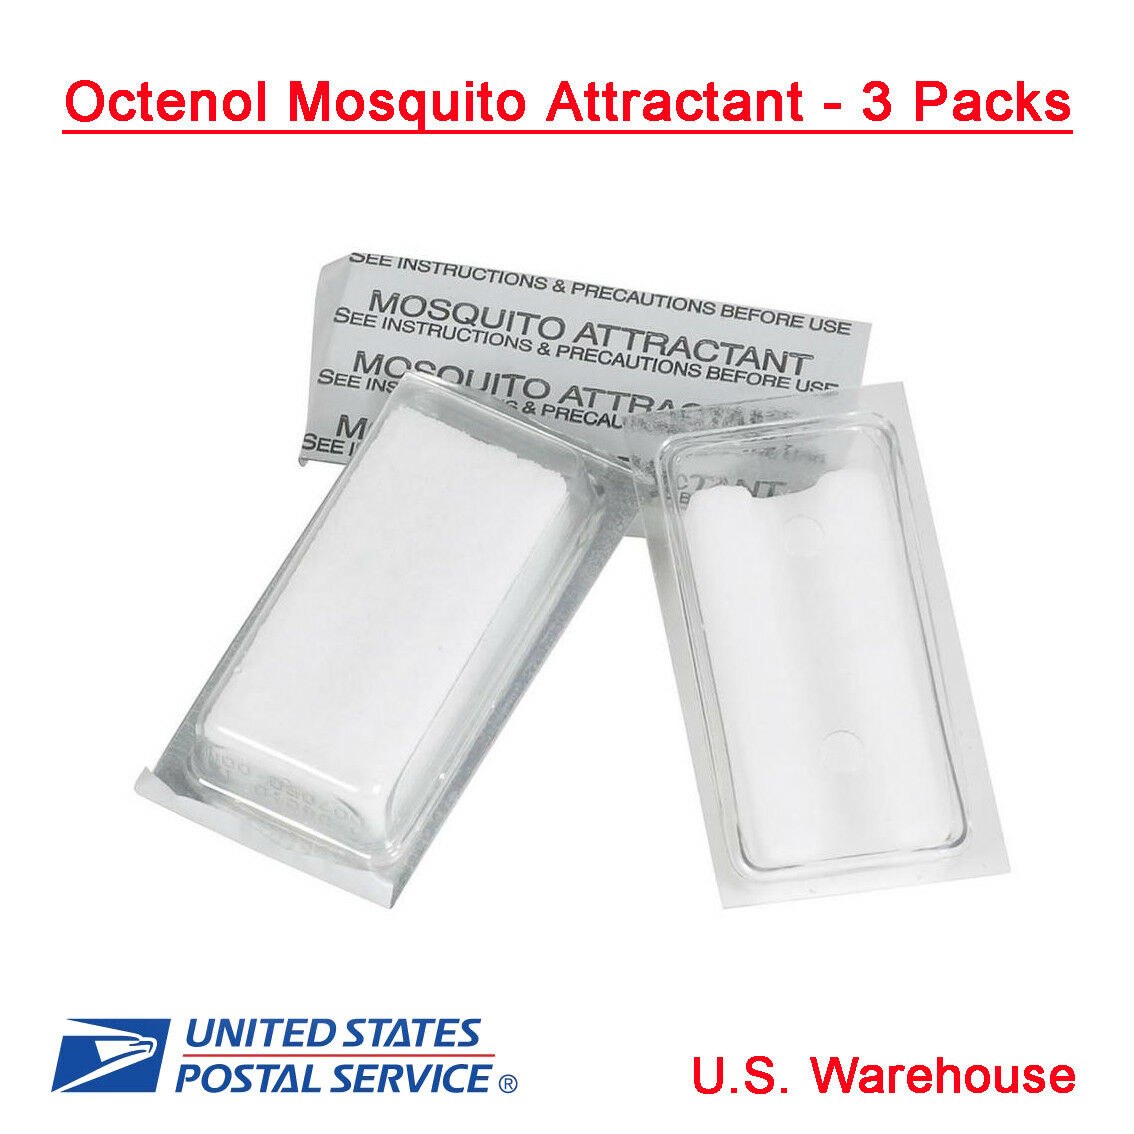 Octenol Mosquito Attractant (3 Pack) Insect For Magnet Traps Device (oe)